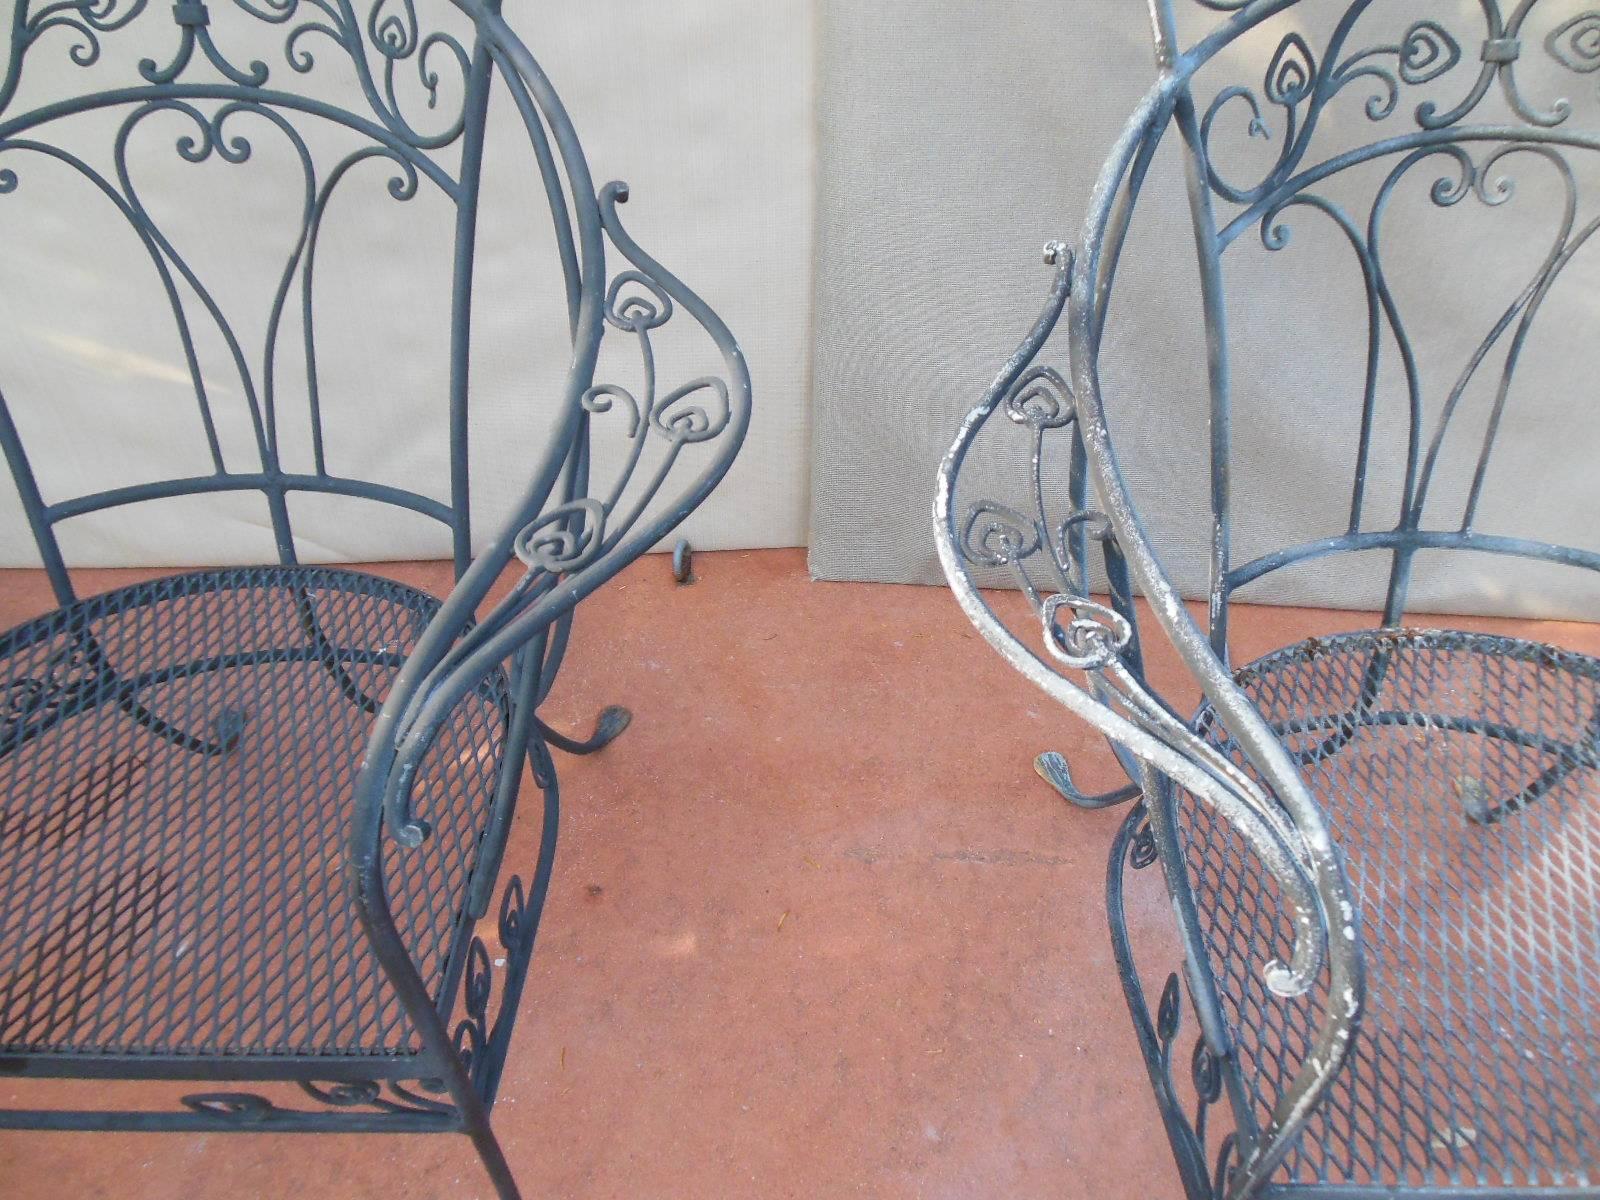 vintage wrought iron peacock chair